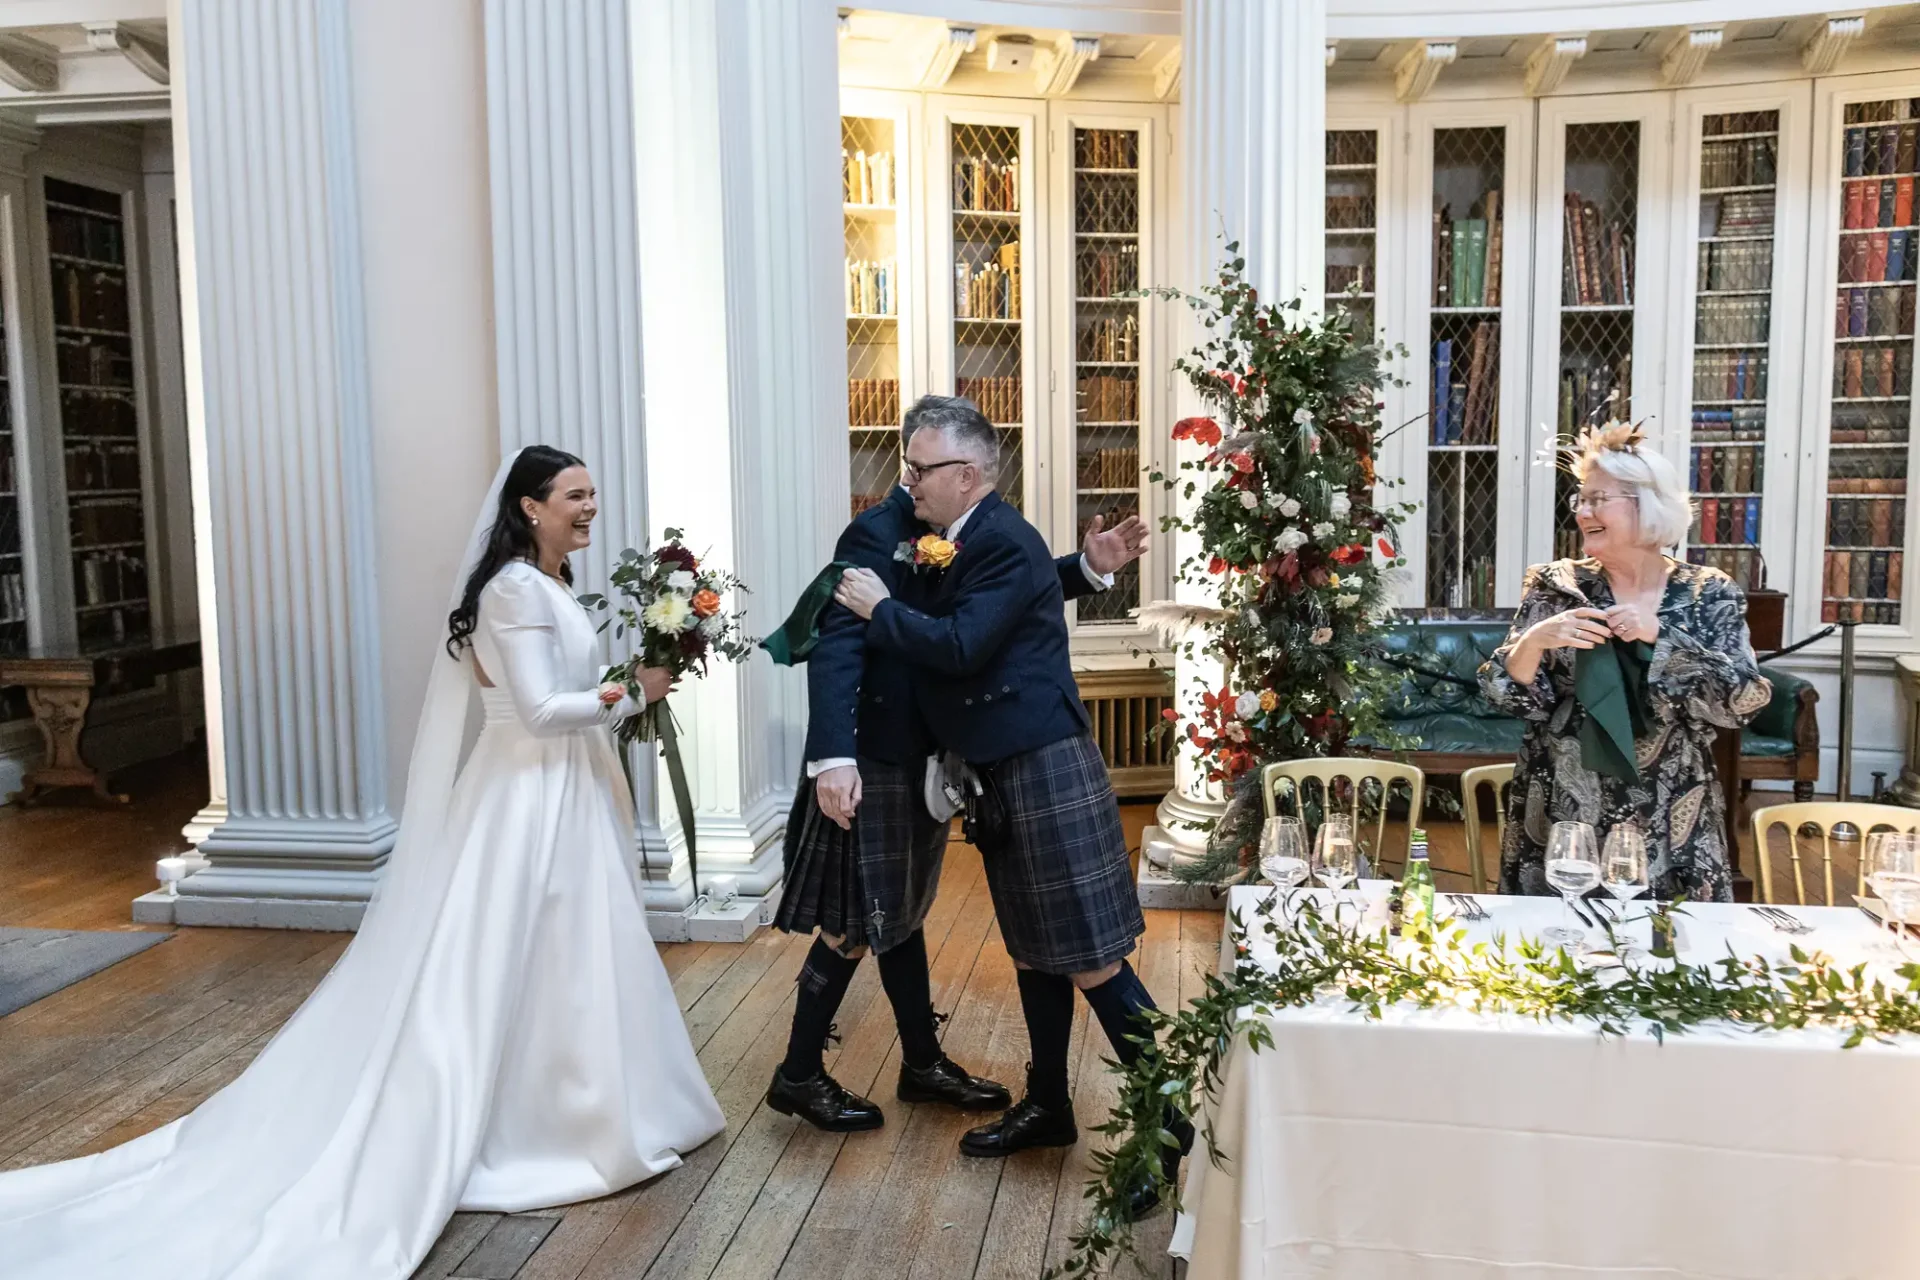 A bride in a white dress and a groom in a kilt laugh joyfully during a wedding toast in a library with guests applauding.